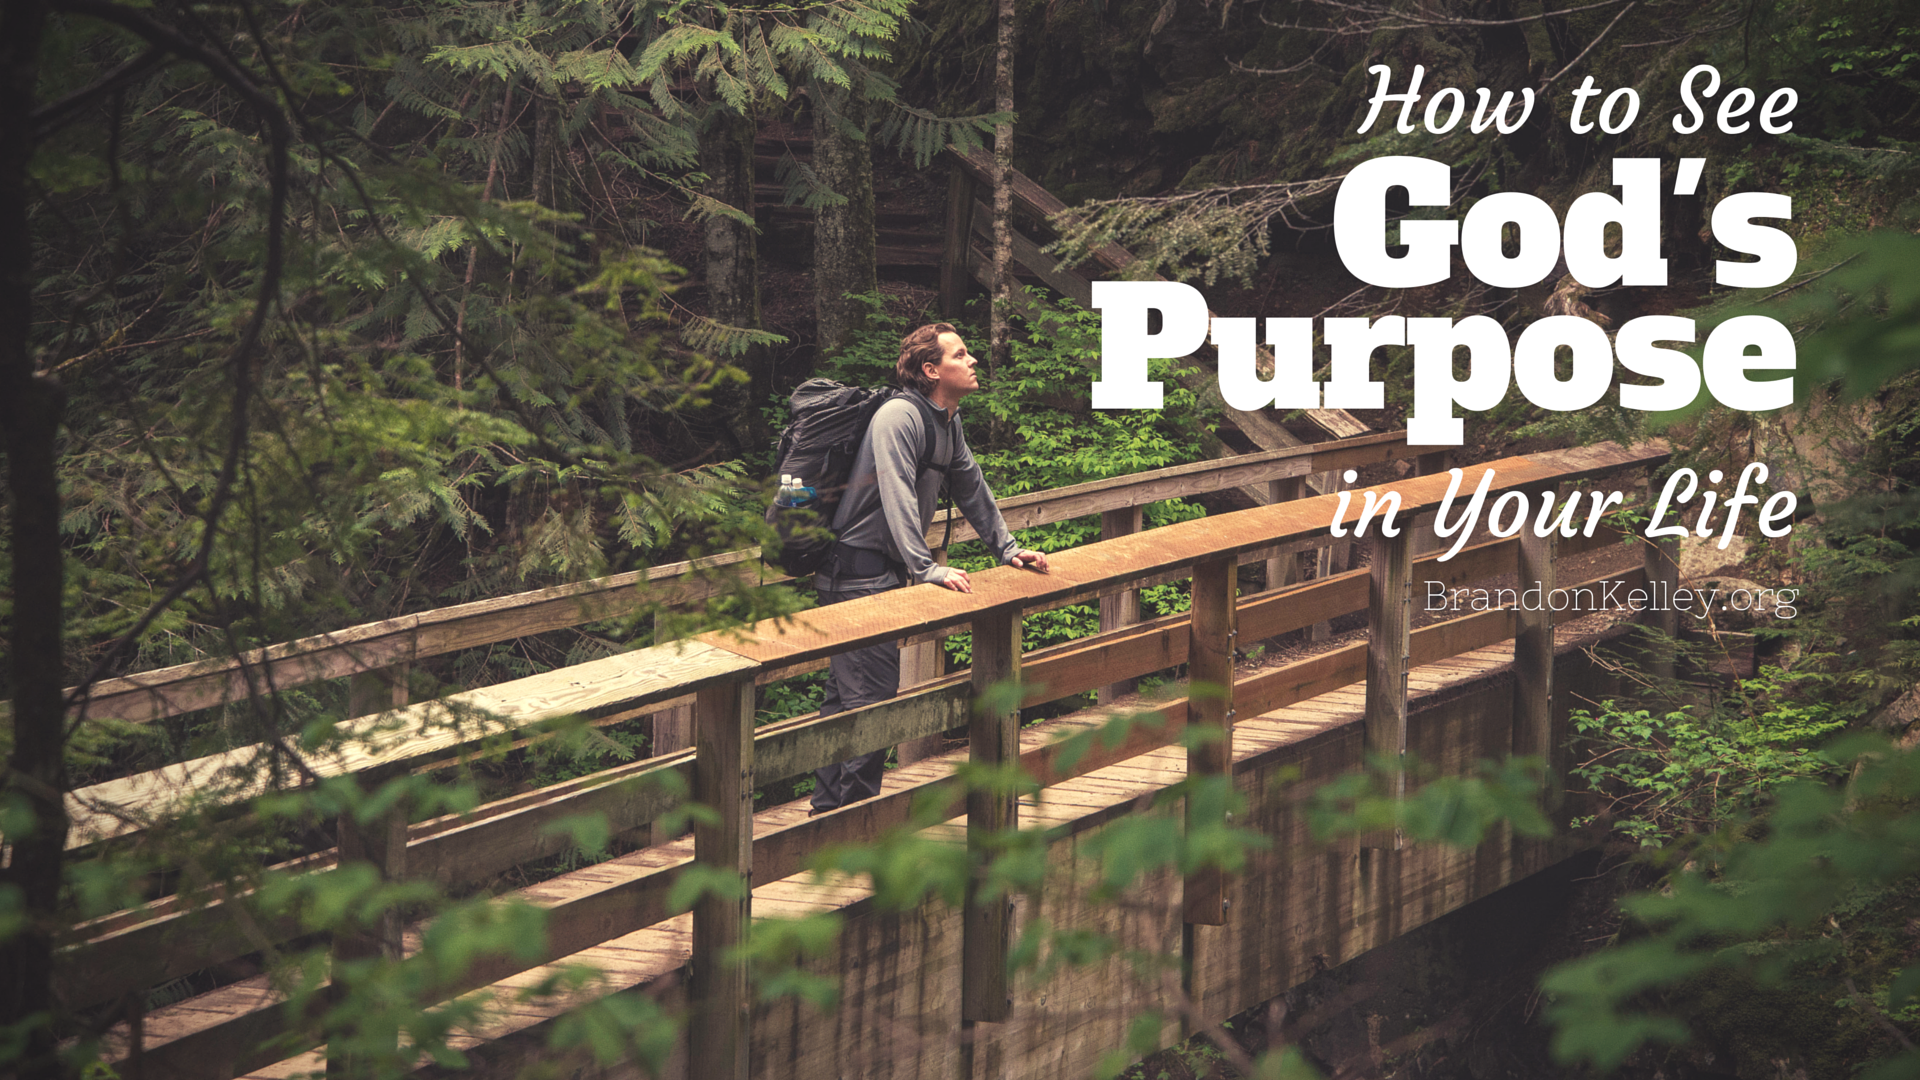 How to See God's Purpose in Your Life